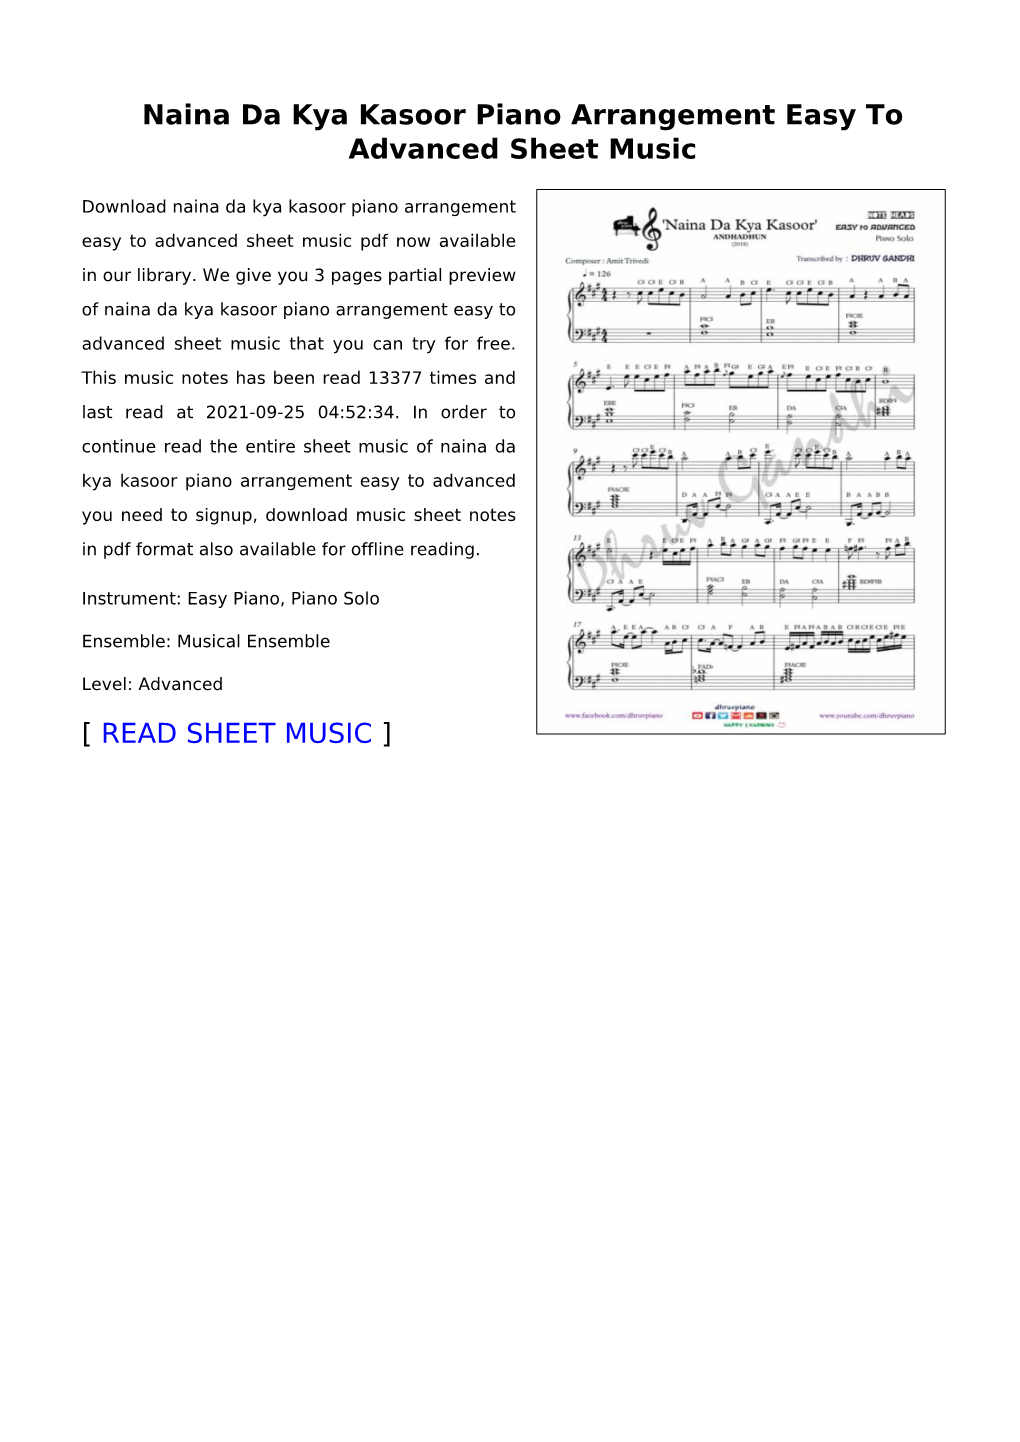 Sheet Music of Naina Da Kya Kasoor Piano Arrangement Easy to Advanced You Need to Signup, Download Music Sheet Notes in Pdf Format Also Available for Offline Reading